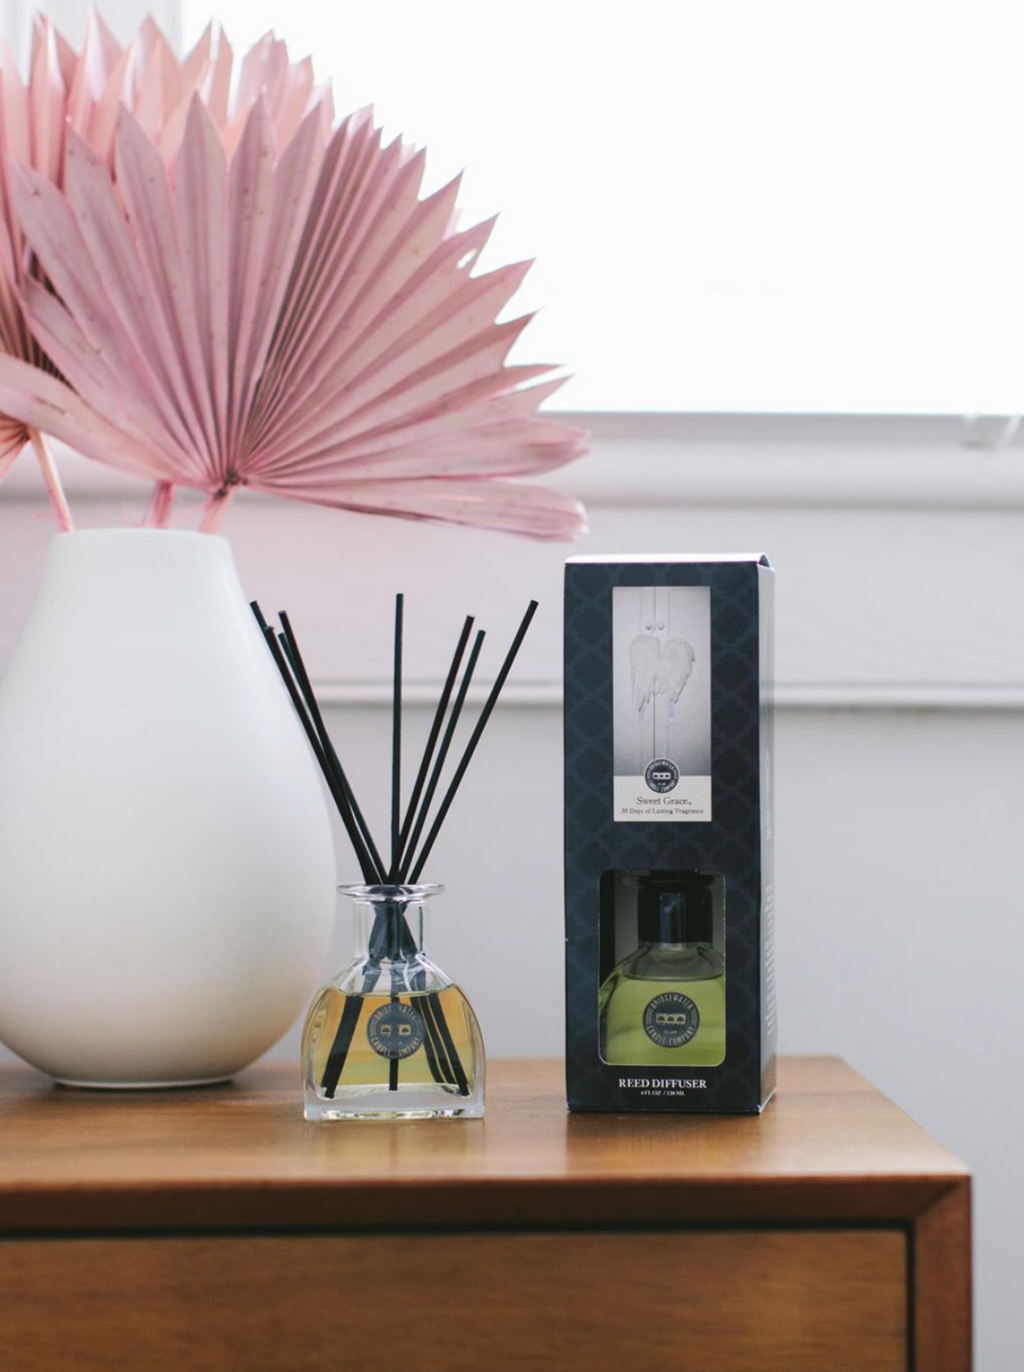 Sweet Grace Reed Diffuser